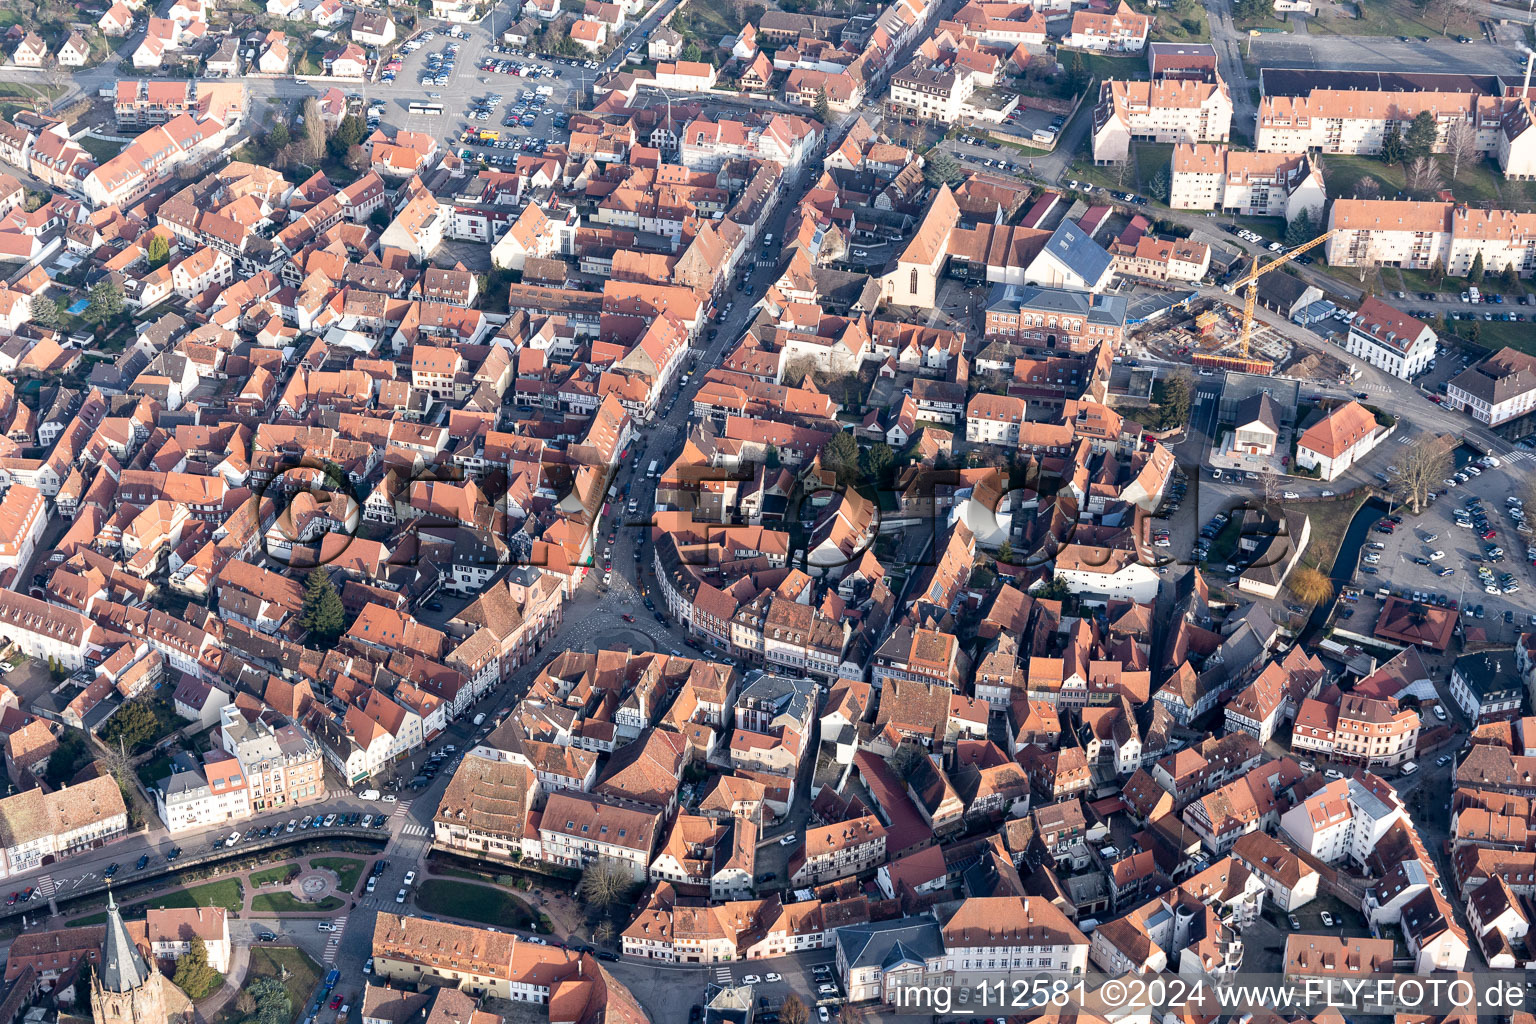 Aerial view of Old Town area and city center in Wissembourg in Grand Est, France